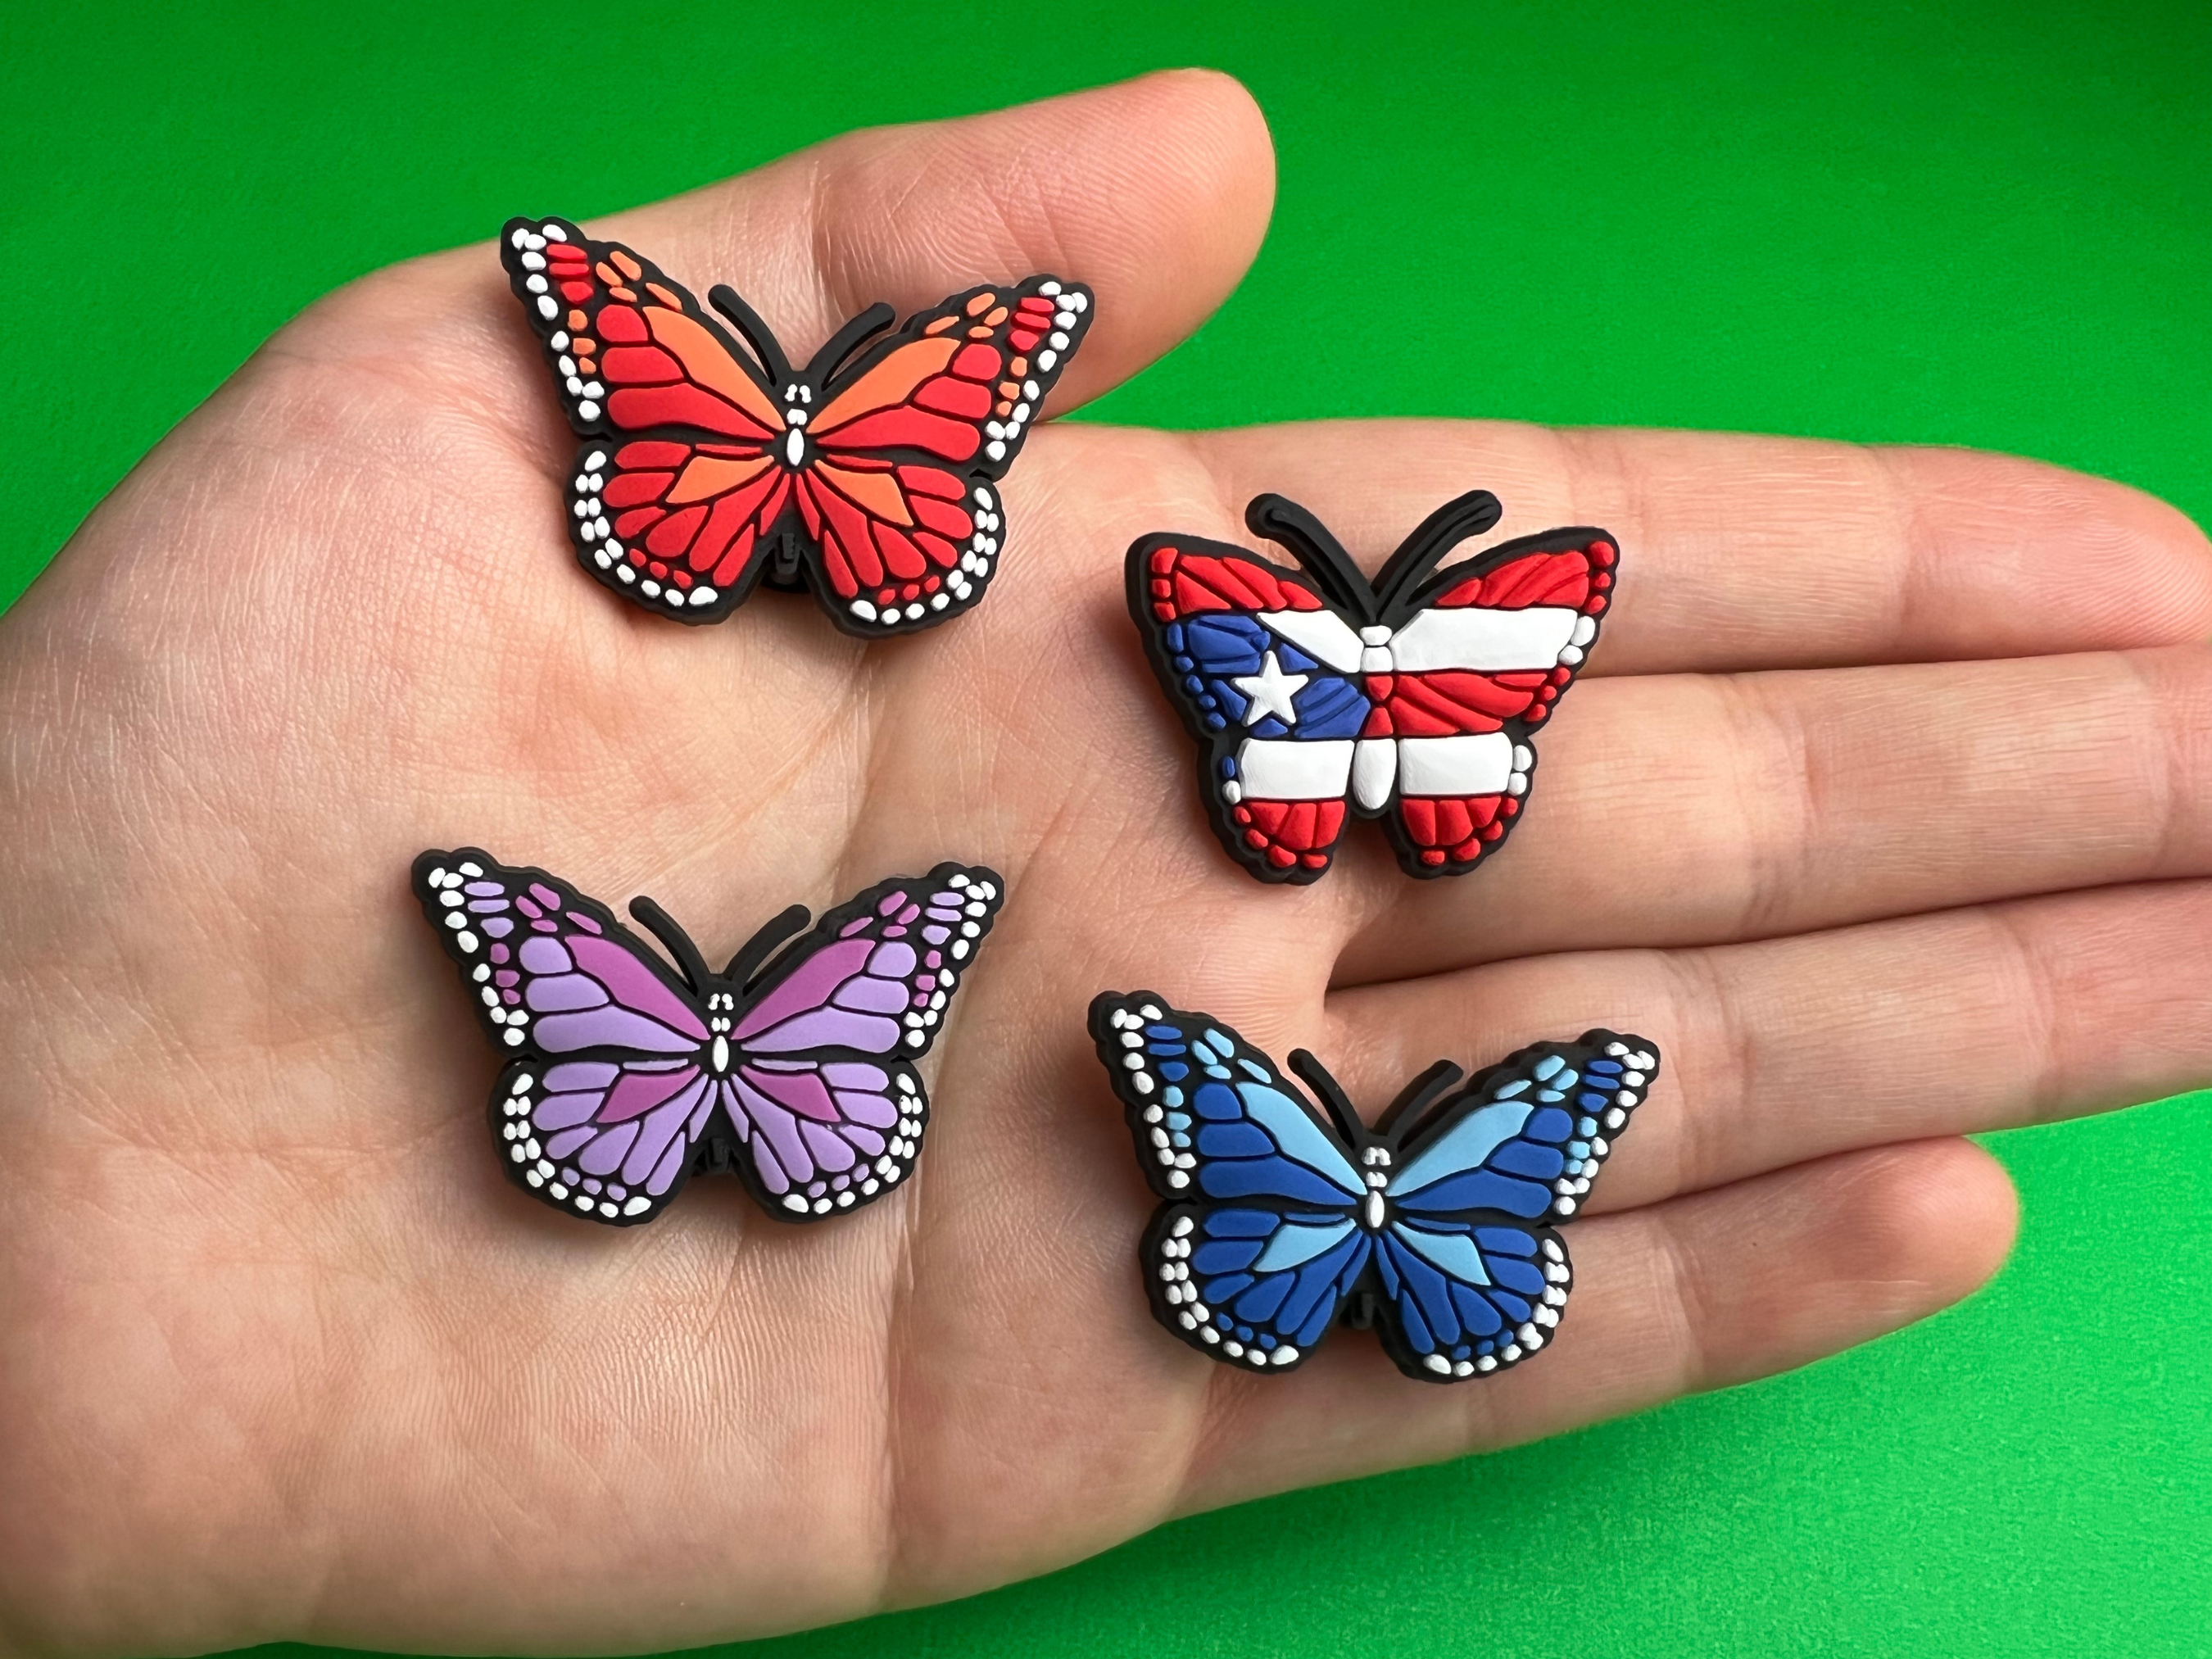 BUTTERFLY Shoe Charms - Cute Shoe Charms